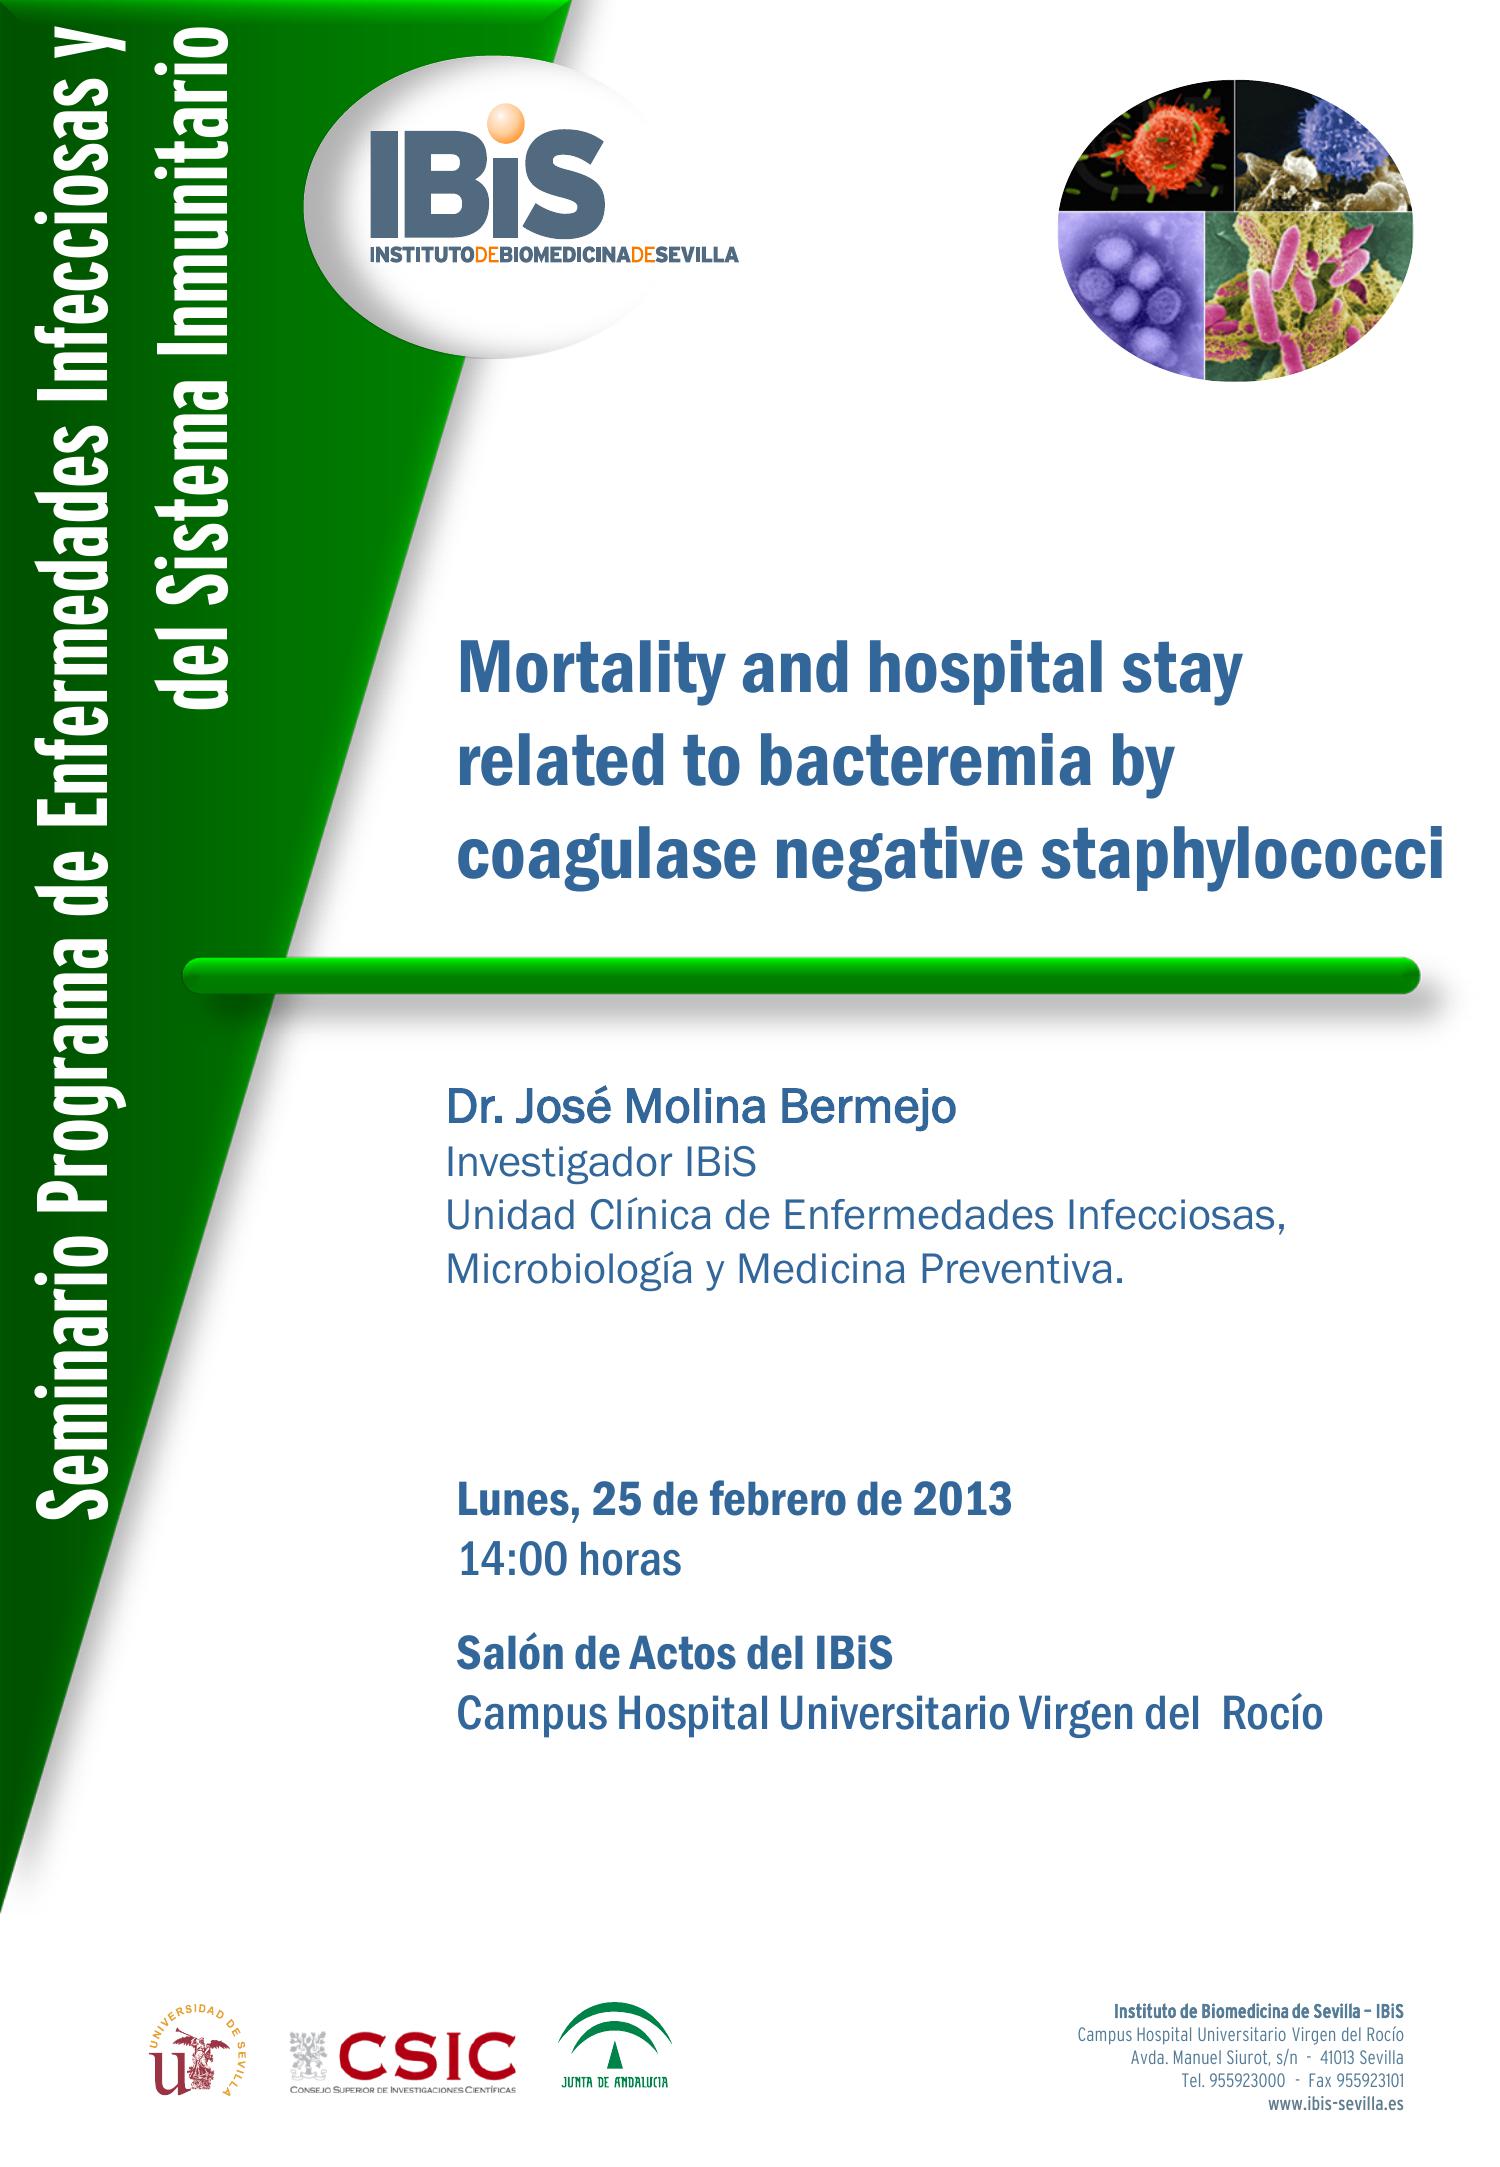 Poster: Mortality and hospital stay related to bacteremia by coagulase negative staphylococci.